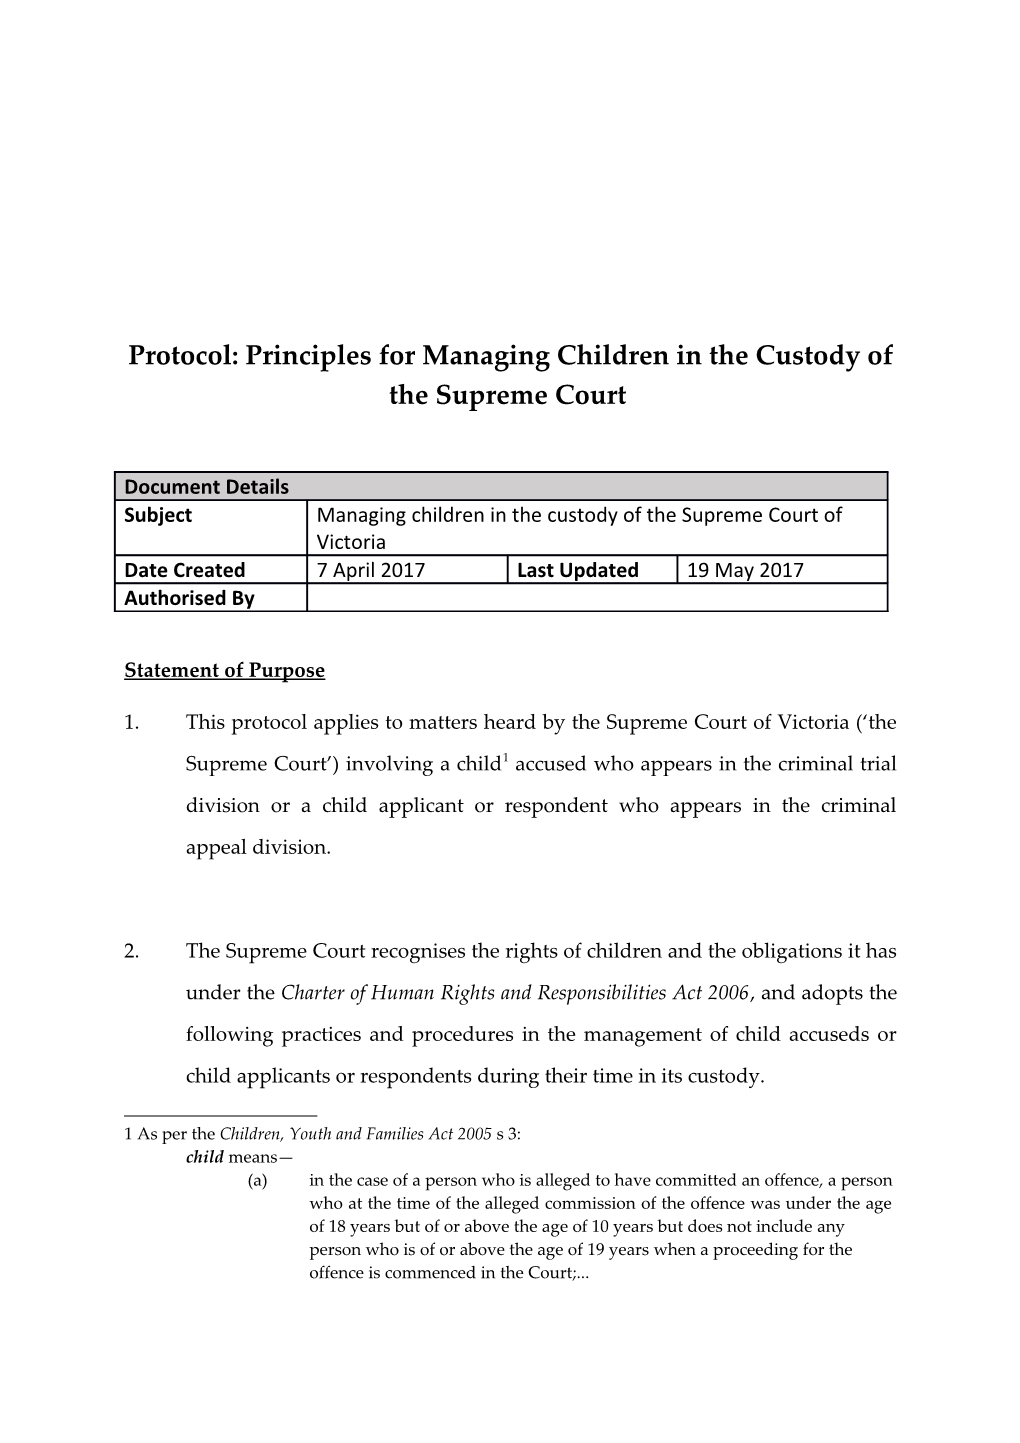 Protocol: Principles for Managing Childrenin the Custody of the Supreme Court